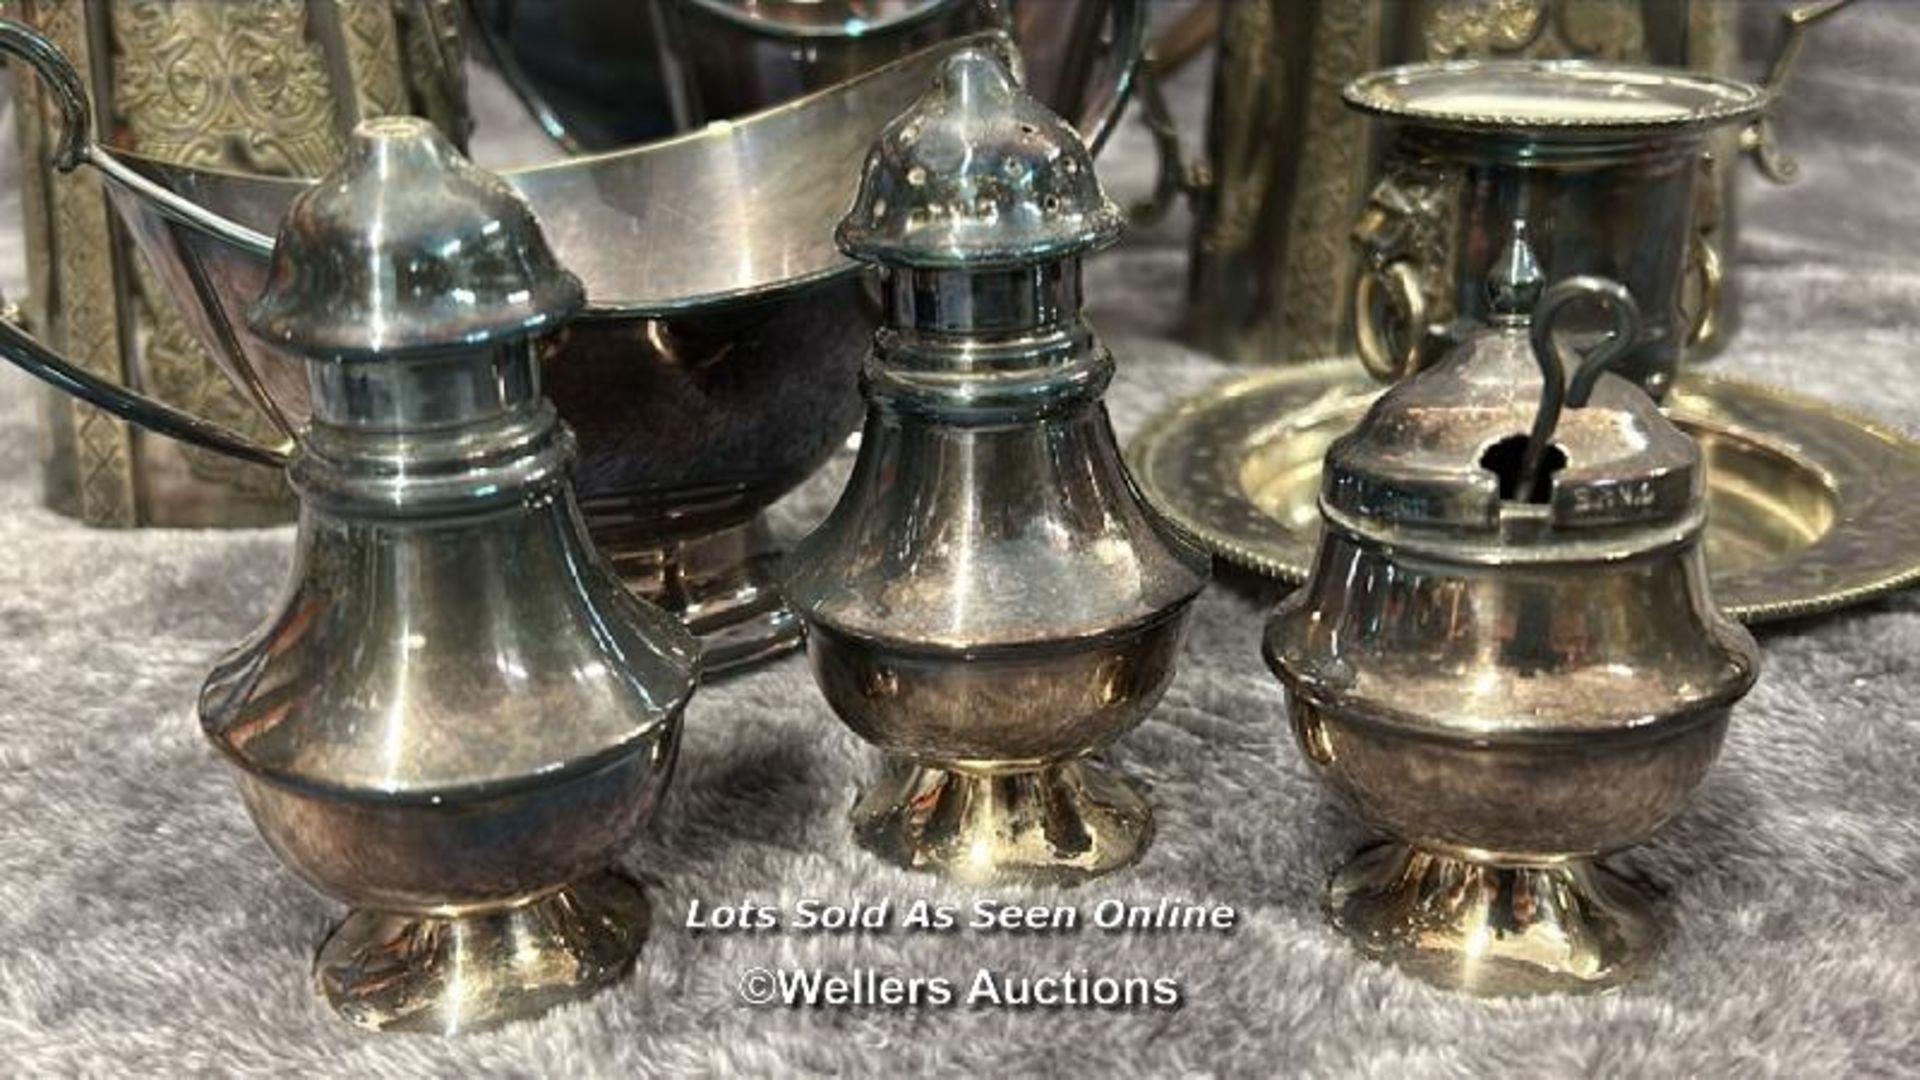 A large collection of antique metal plated items including a three armed candelabra, goblets, - Image 8 of 17